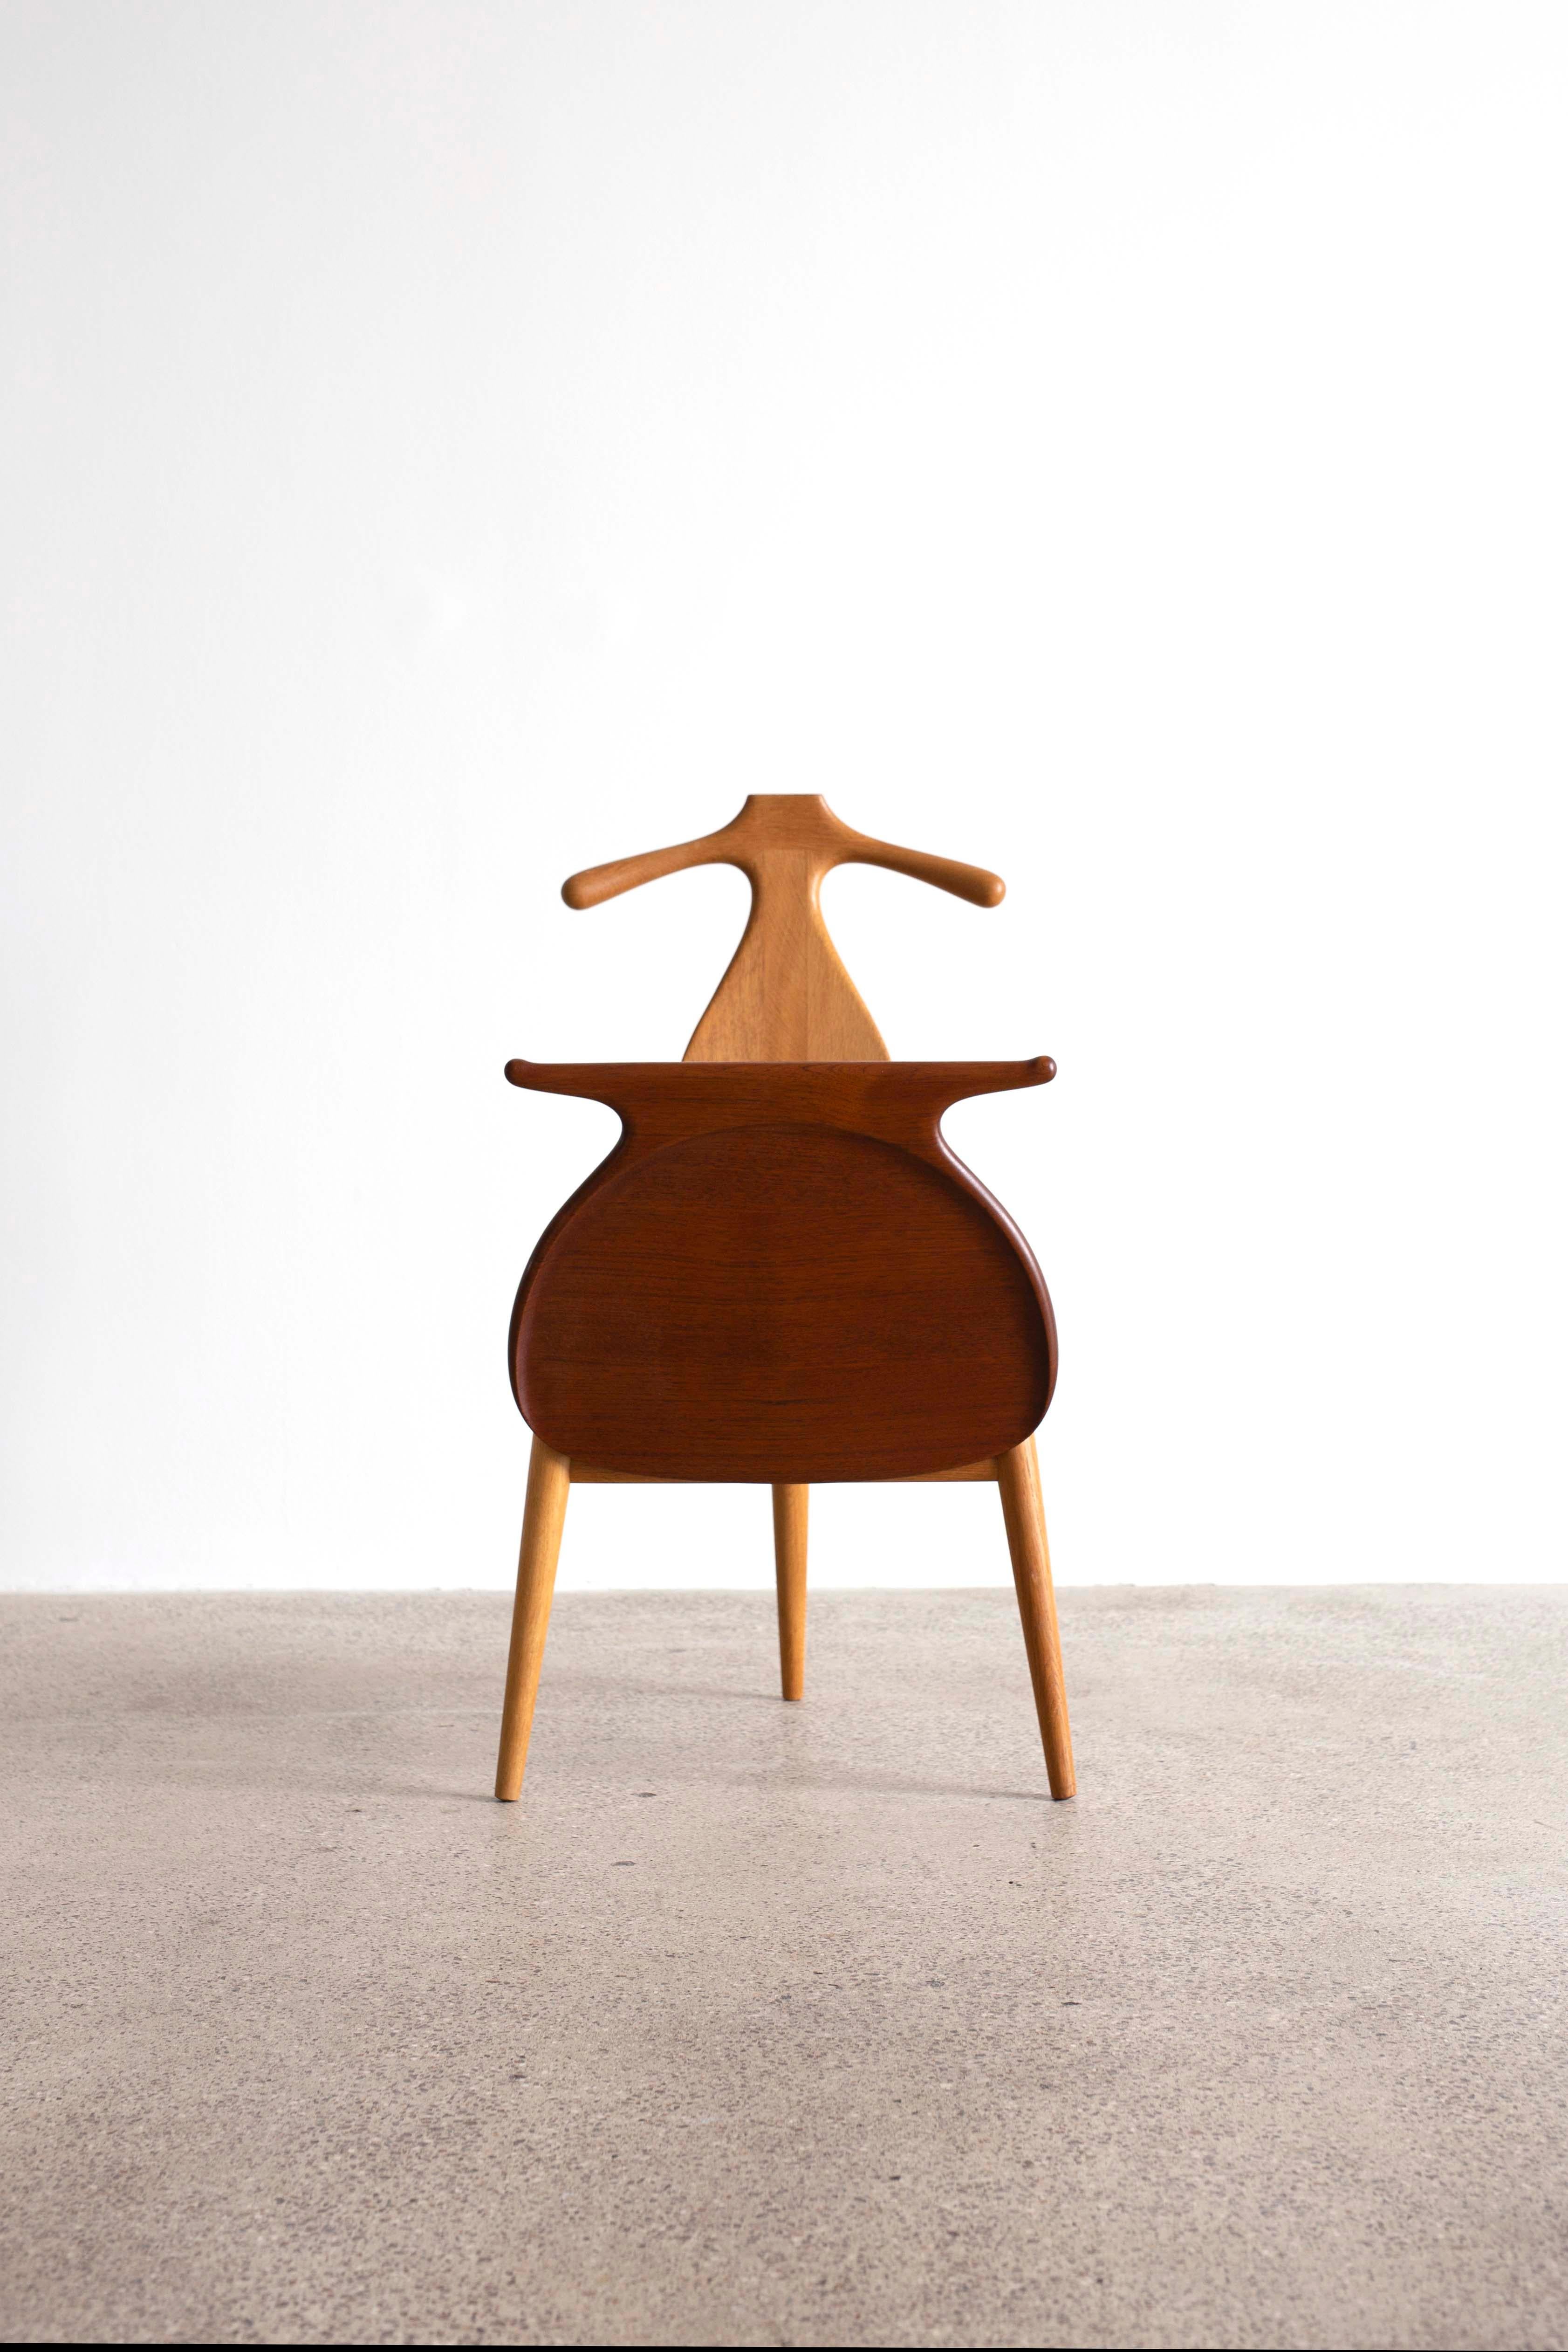 Hans J. Wegner 'Valet chair' with frame of patinated oak and seat of teak with storage space underneath. 

Designed by Hans J. Wegner 1953, executed by cabinetmaker Johannes Hansen, Denmark model JH-540. Burn-marked by maker. 

Excellent condition.